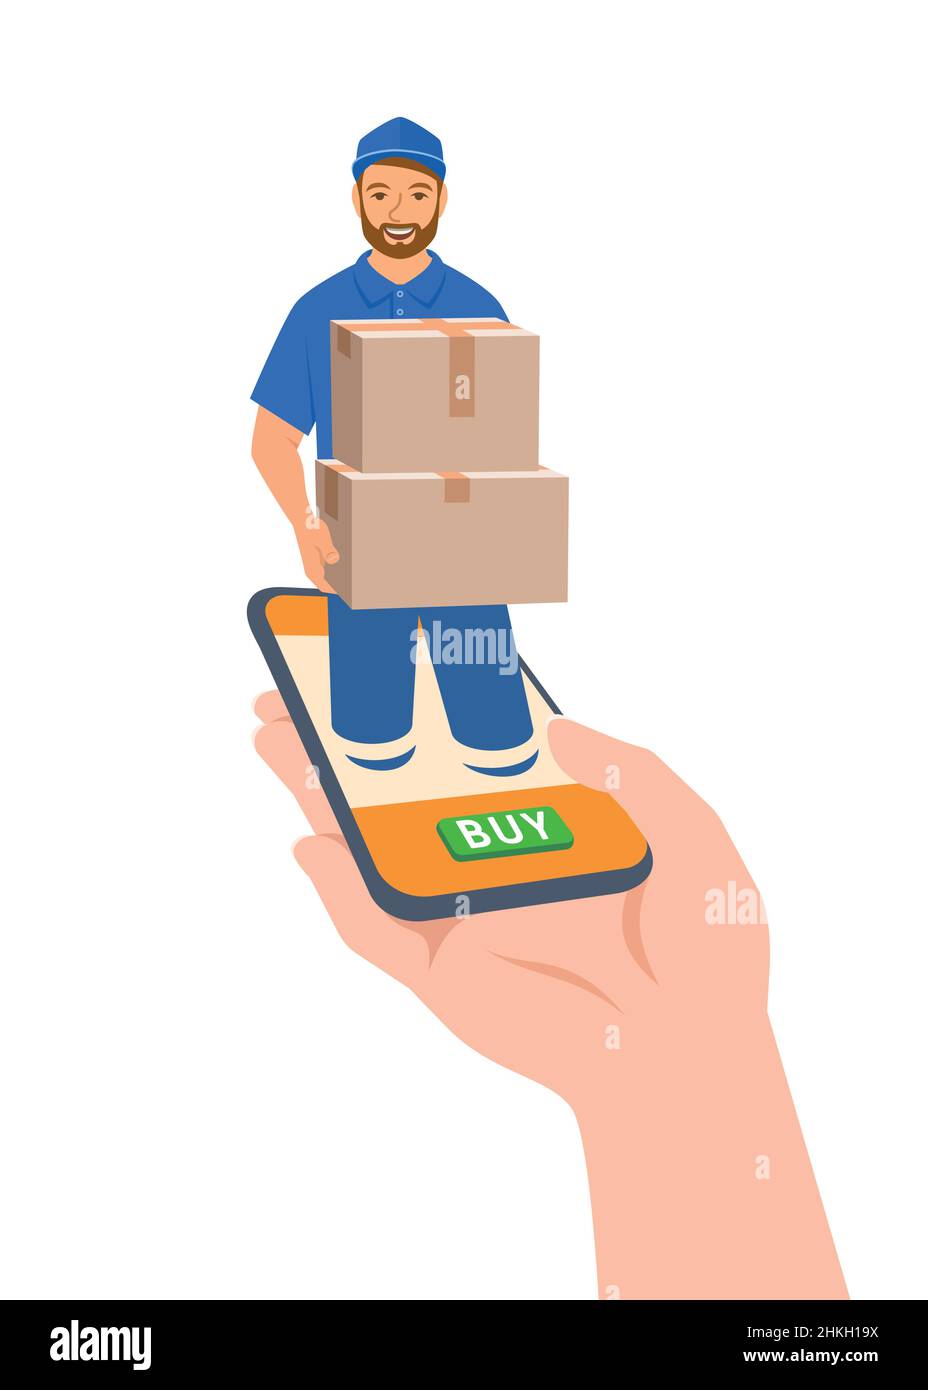 Express delivery concept. Customer makes an order online using smartphone app and gets it fast. Young friendly delivery man gives parcels to the clien Stock Vector